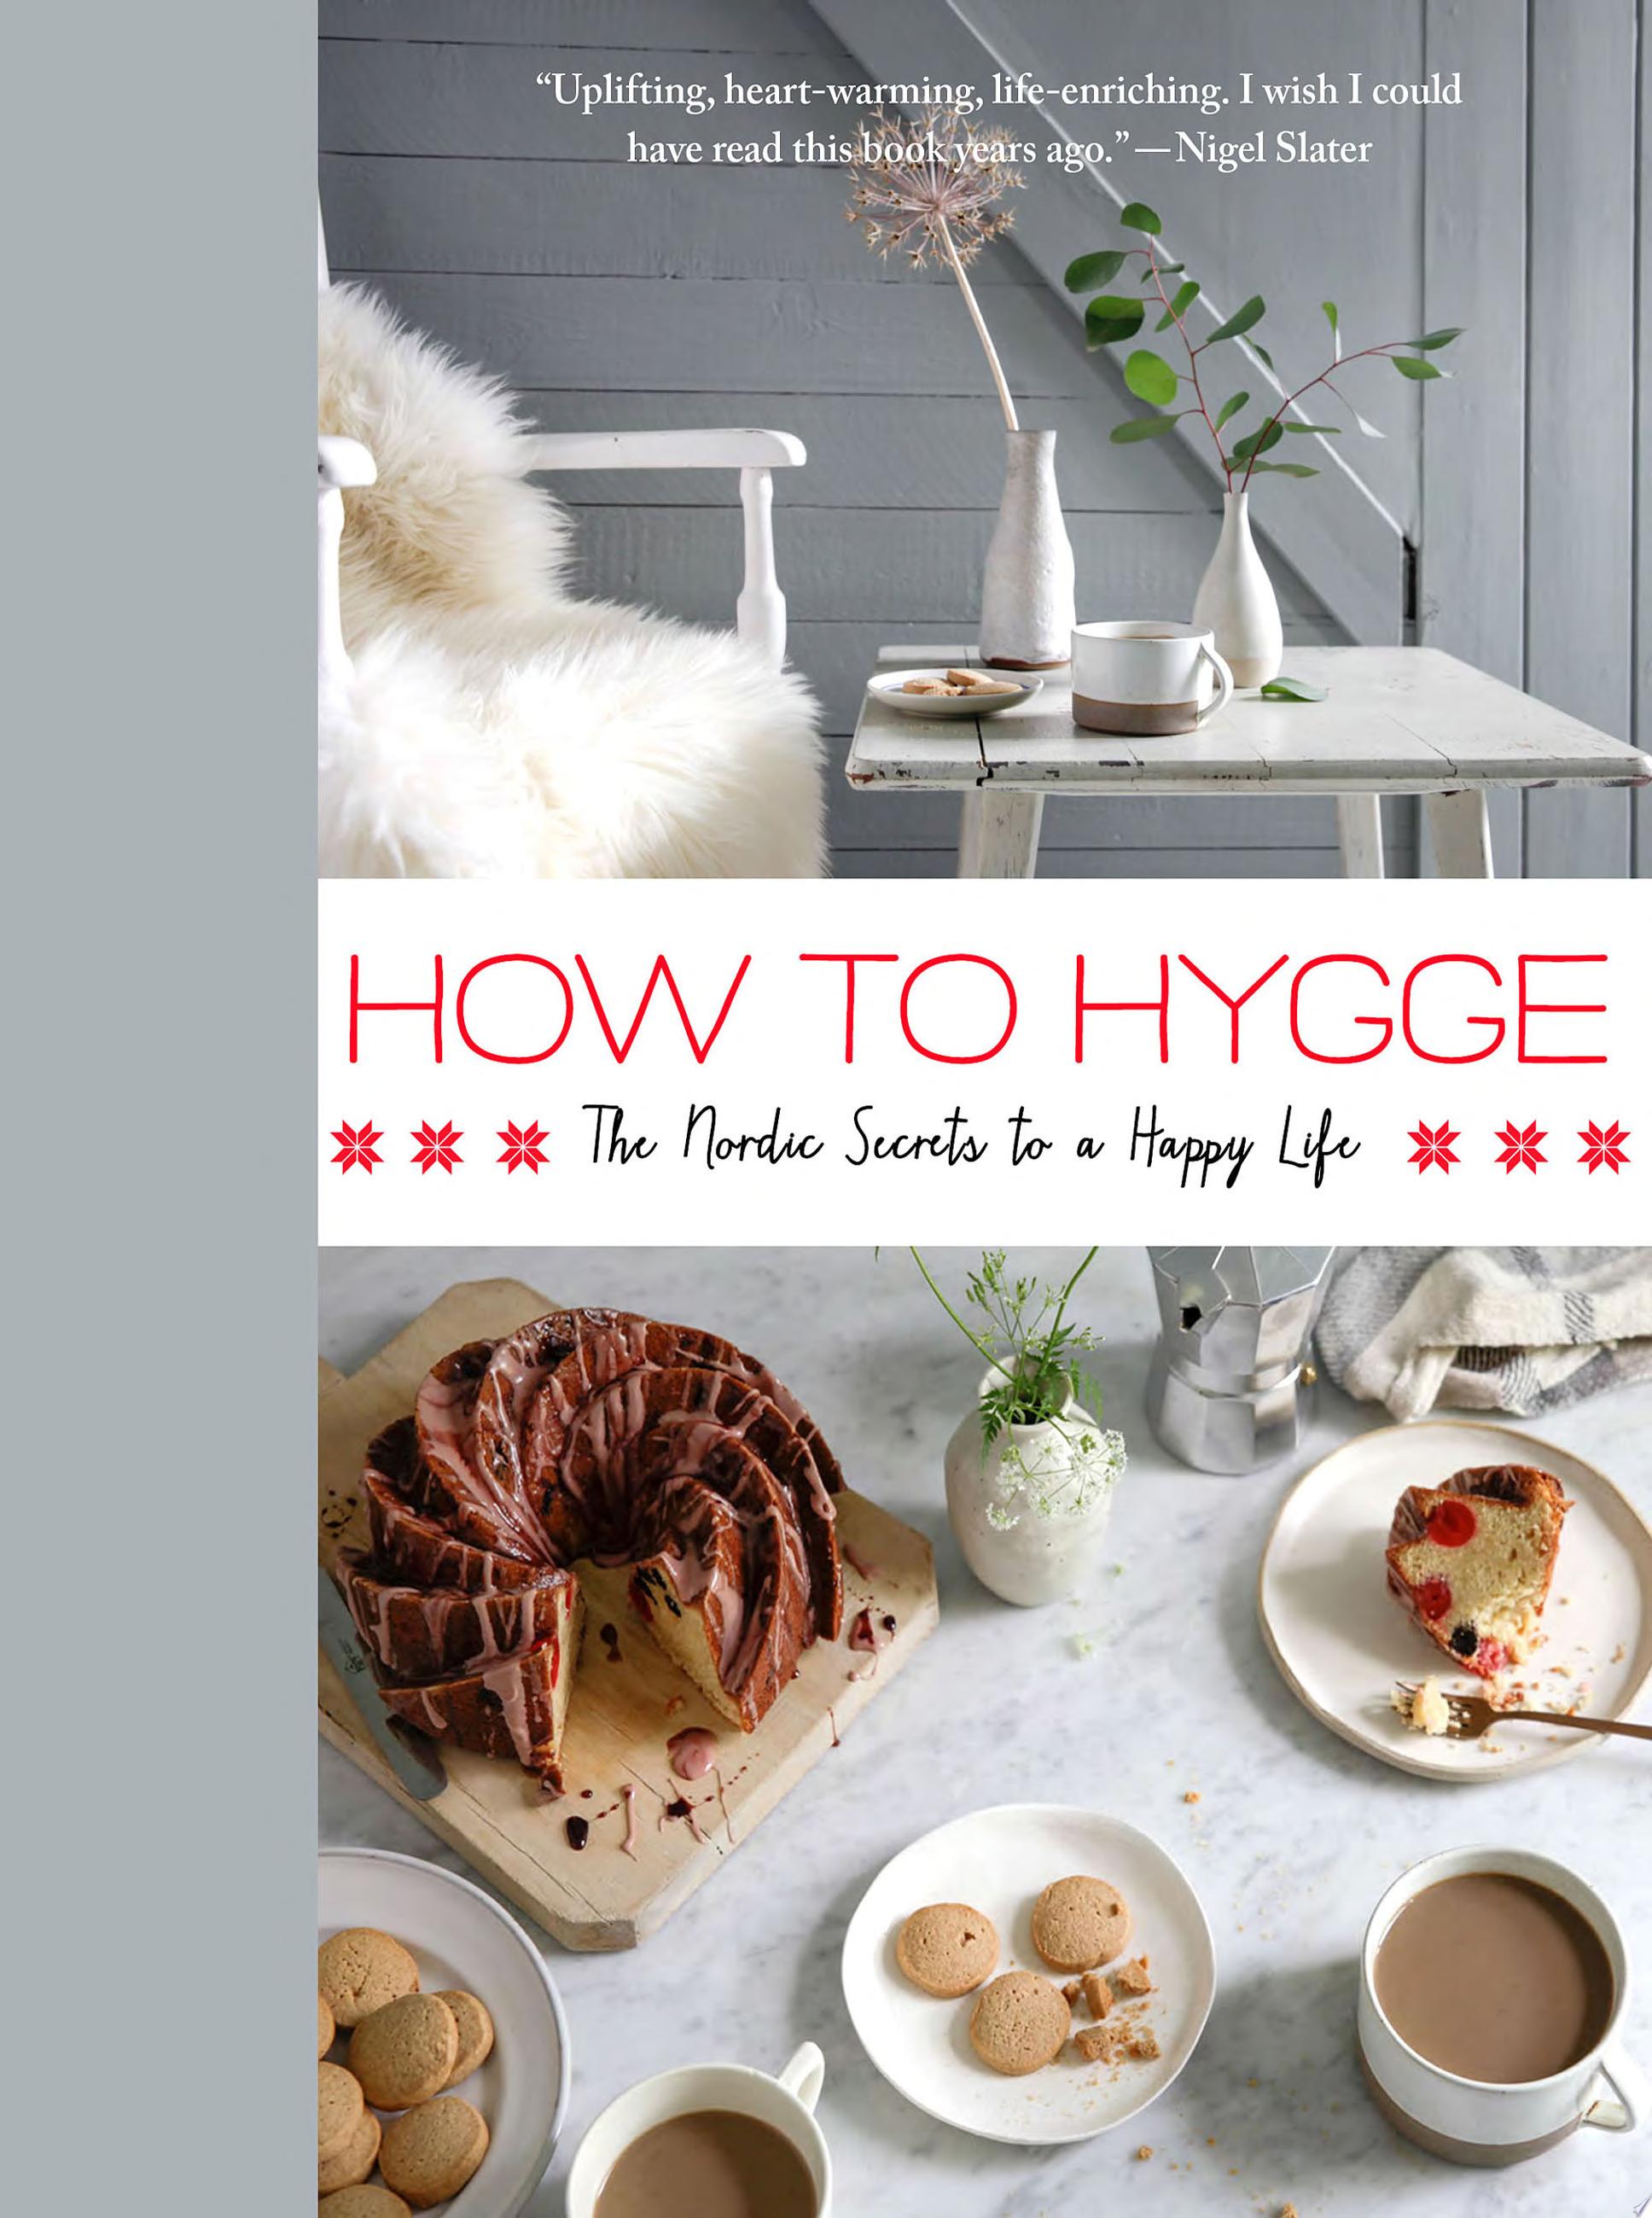 Image for "How to Hygge"